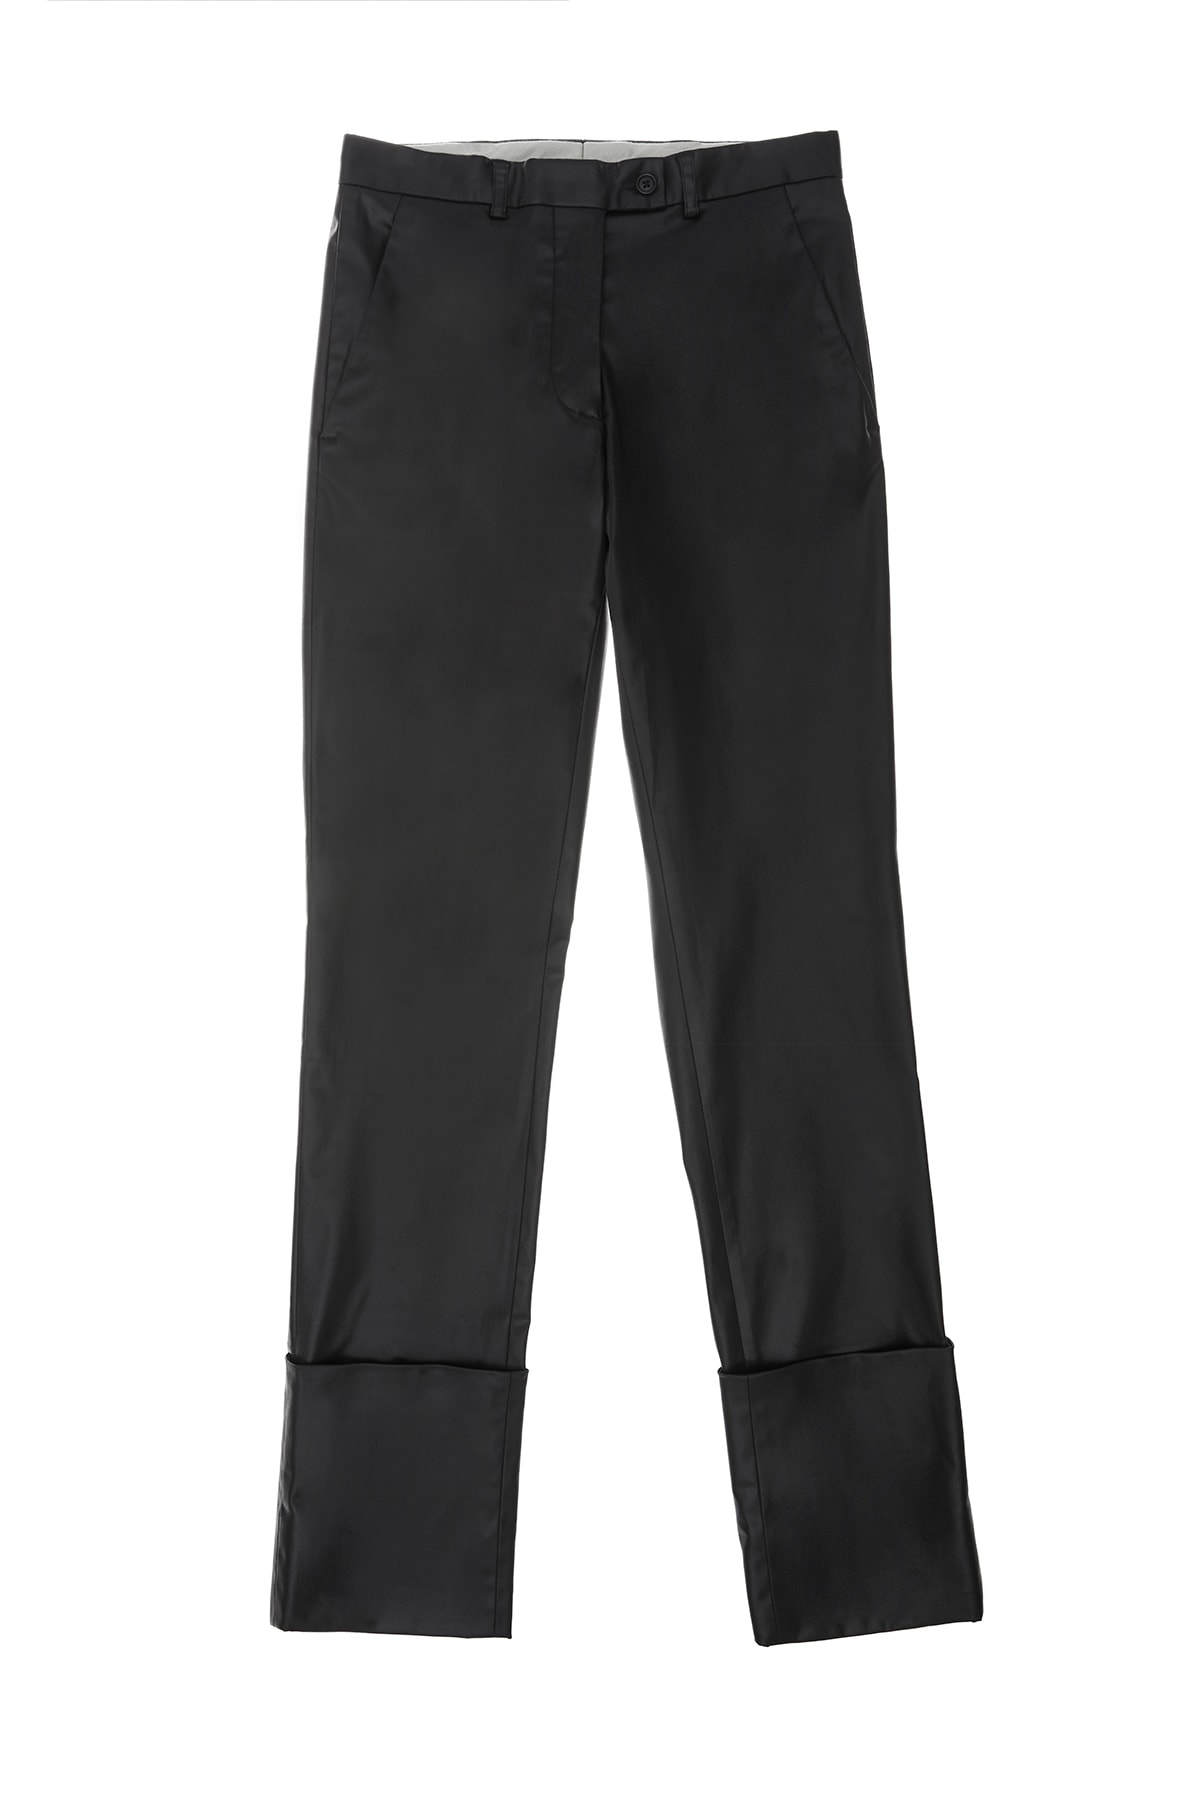 helmut lang re edition byronesque collection turn up trousers 1995 black